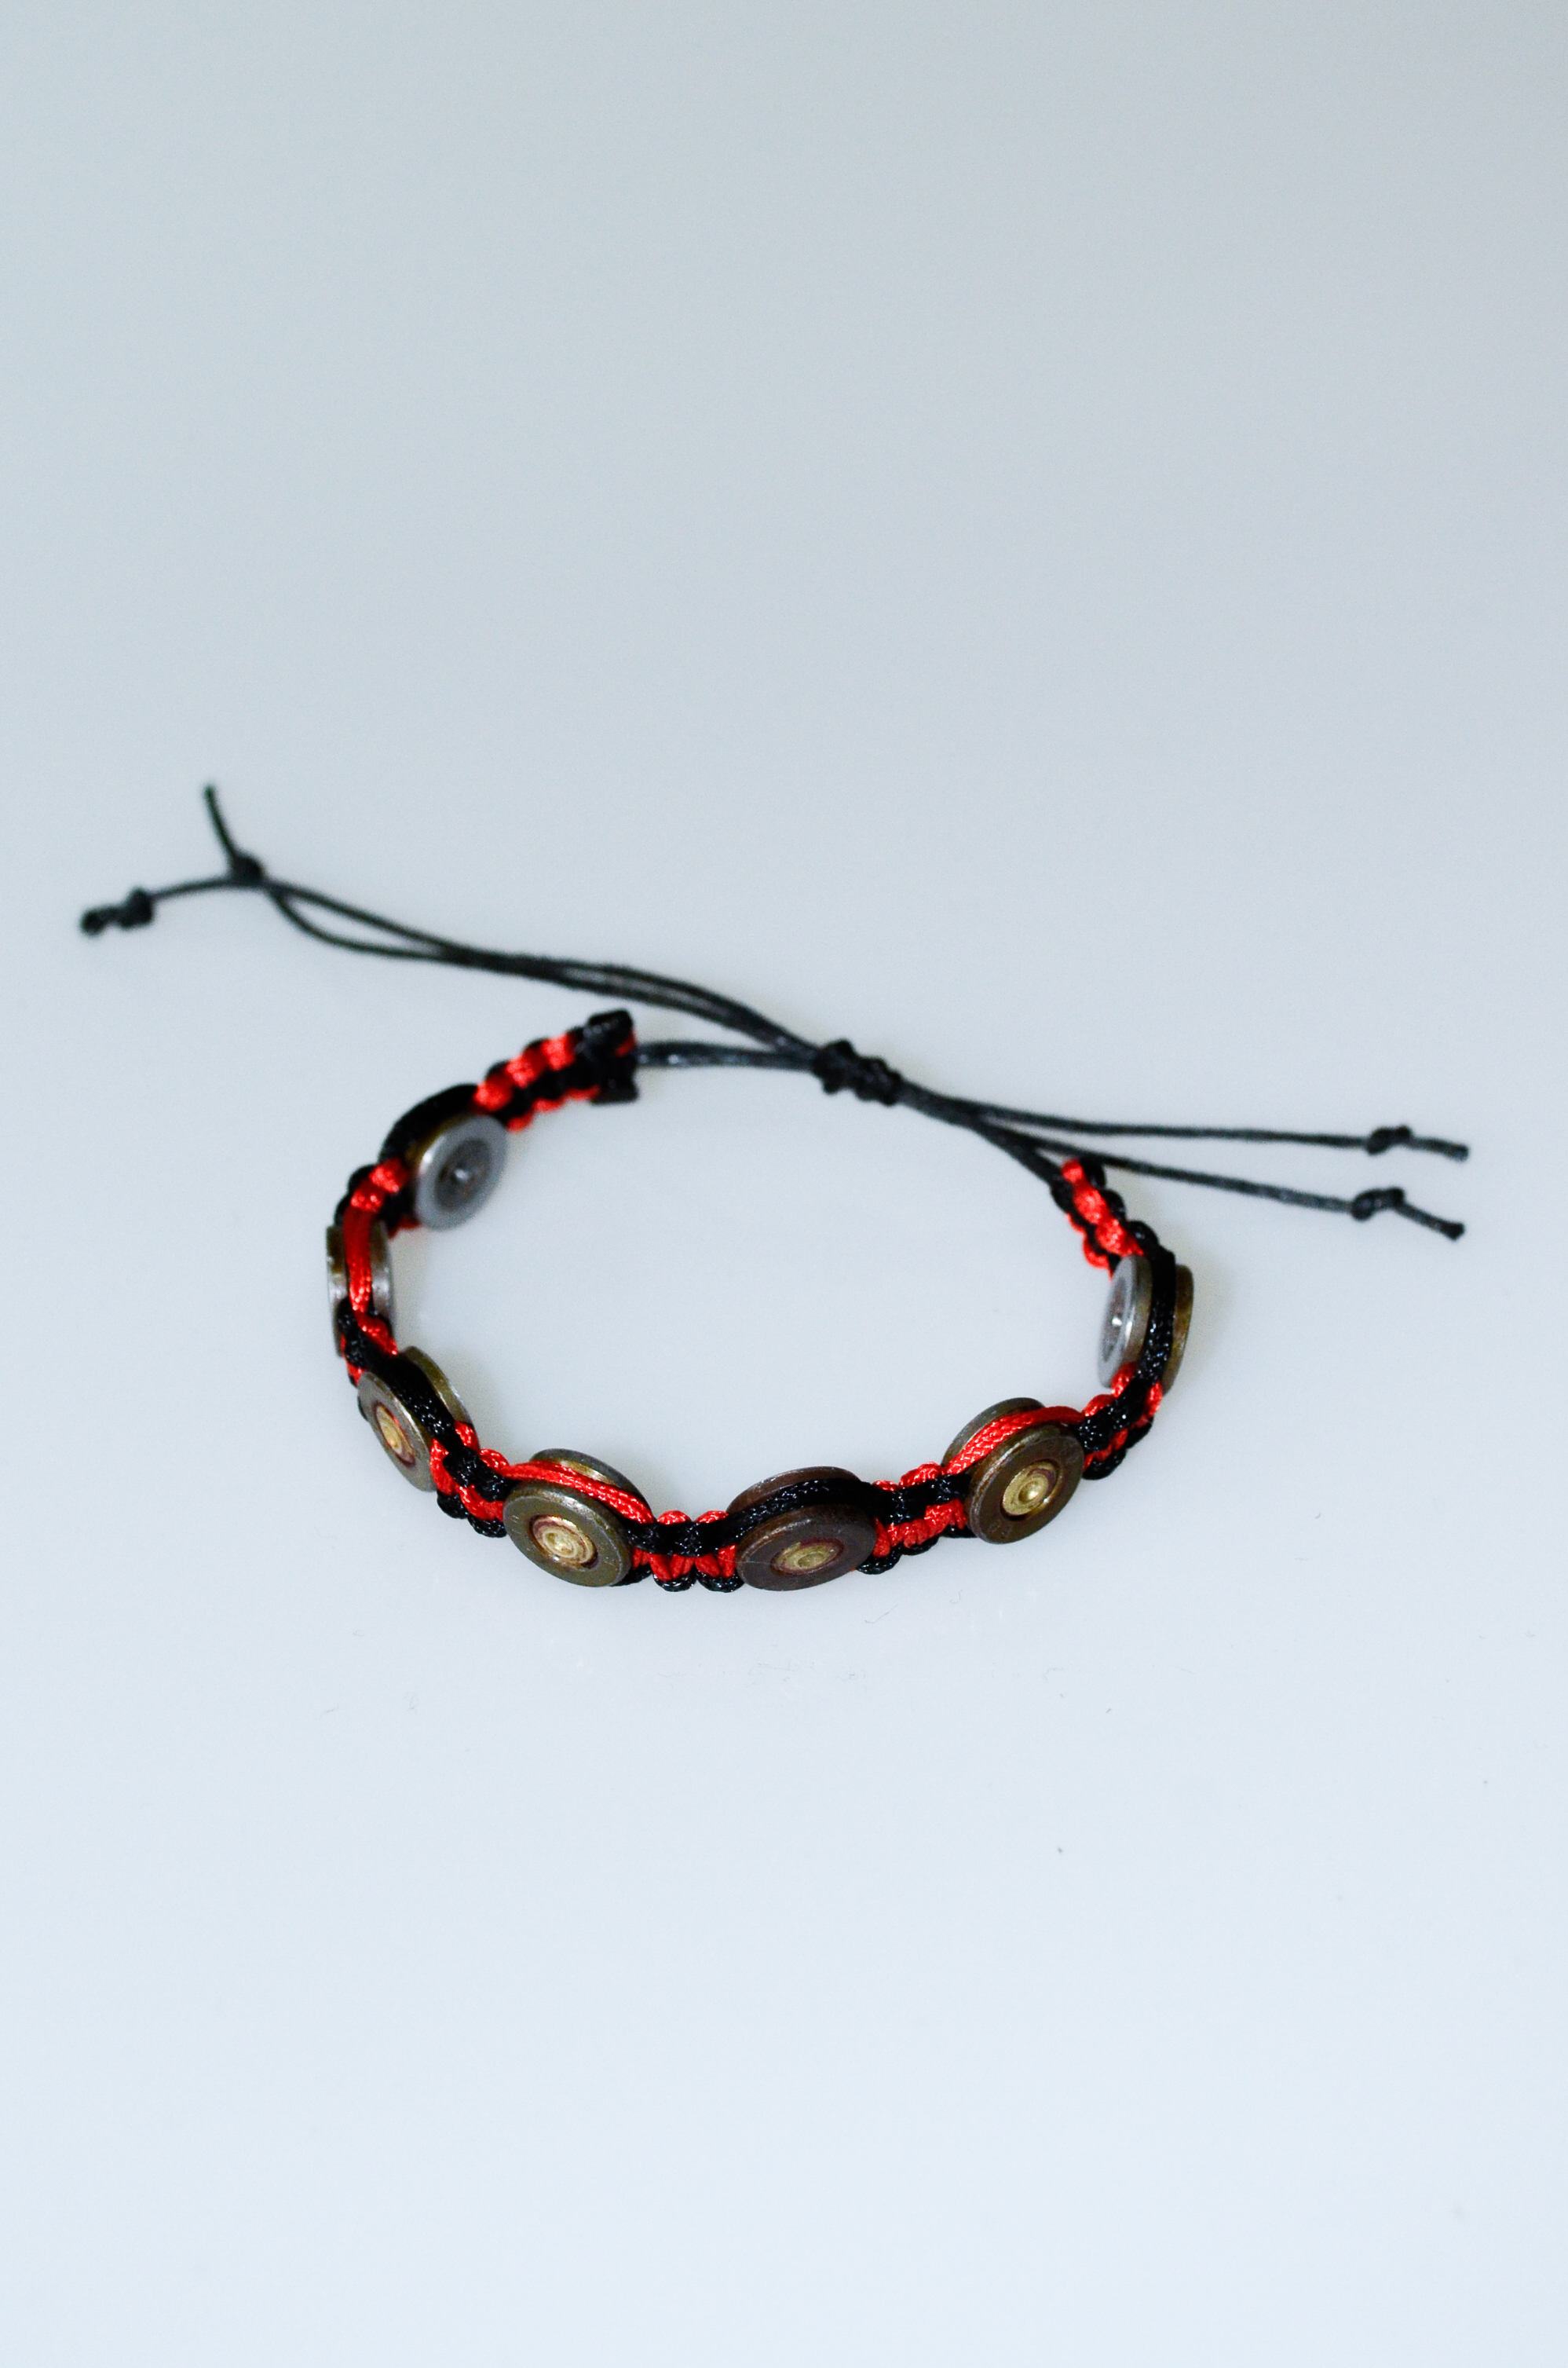 Bracelet made from spent shell casings Red and black